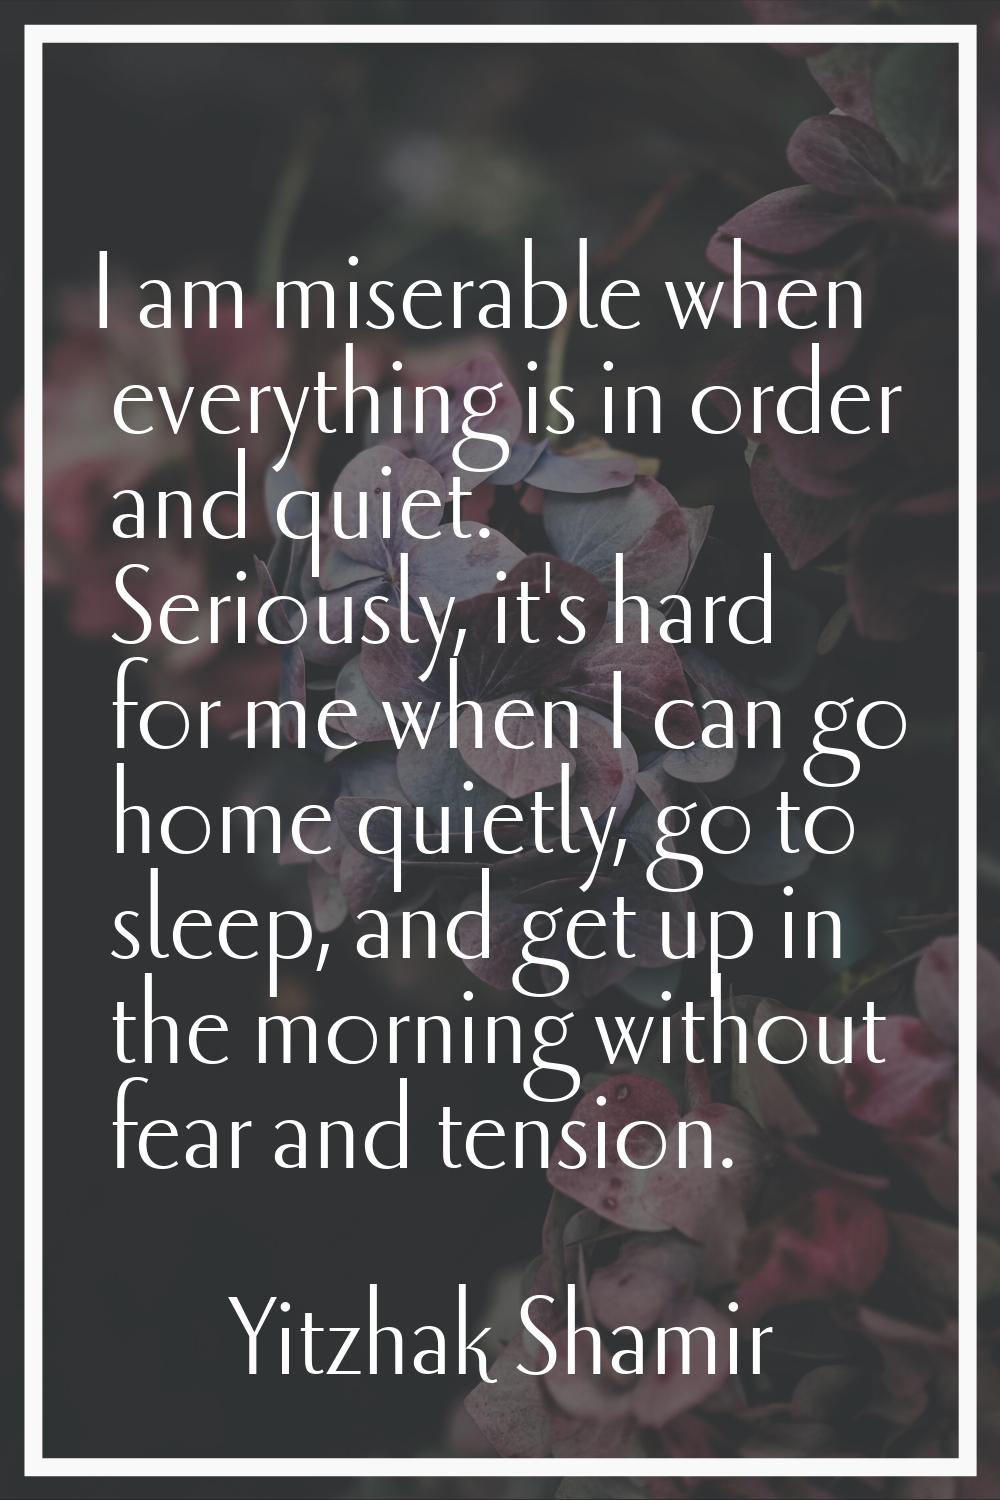 I am miserable when everything is in order and quiet. Seriously, it's hard for me when I can go hom